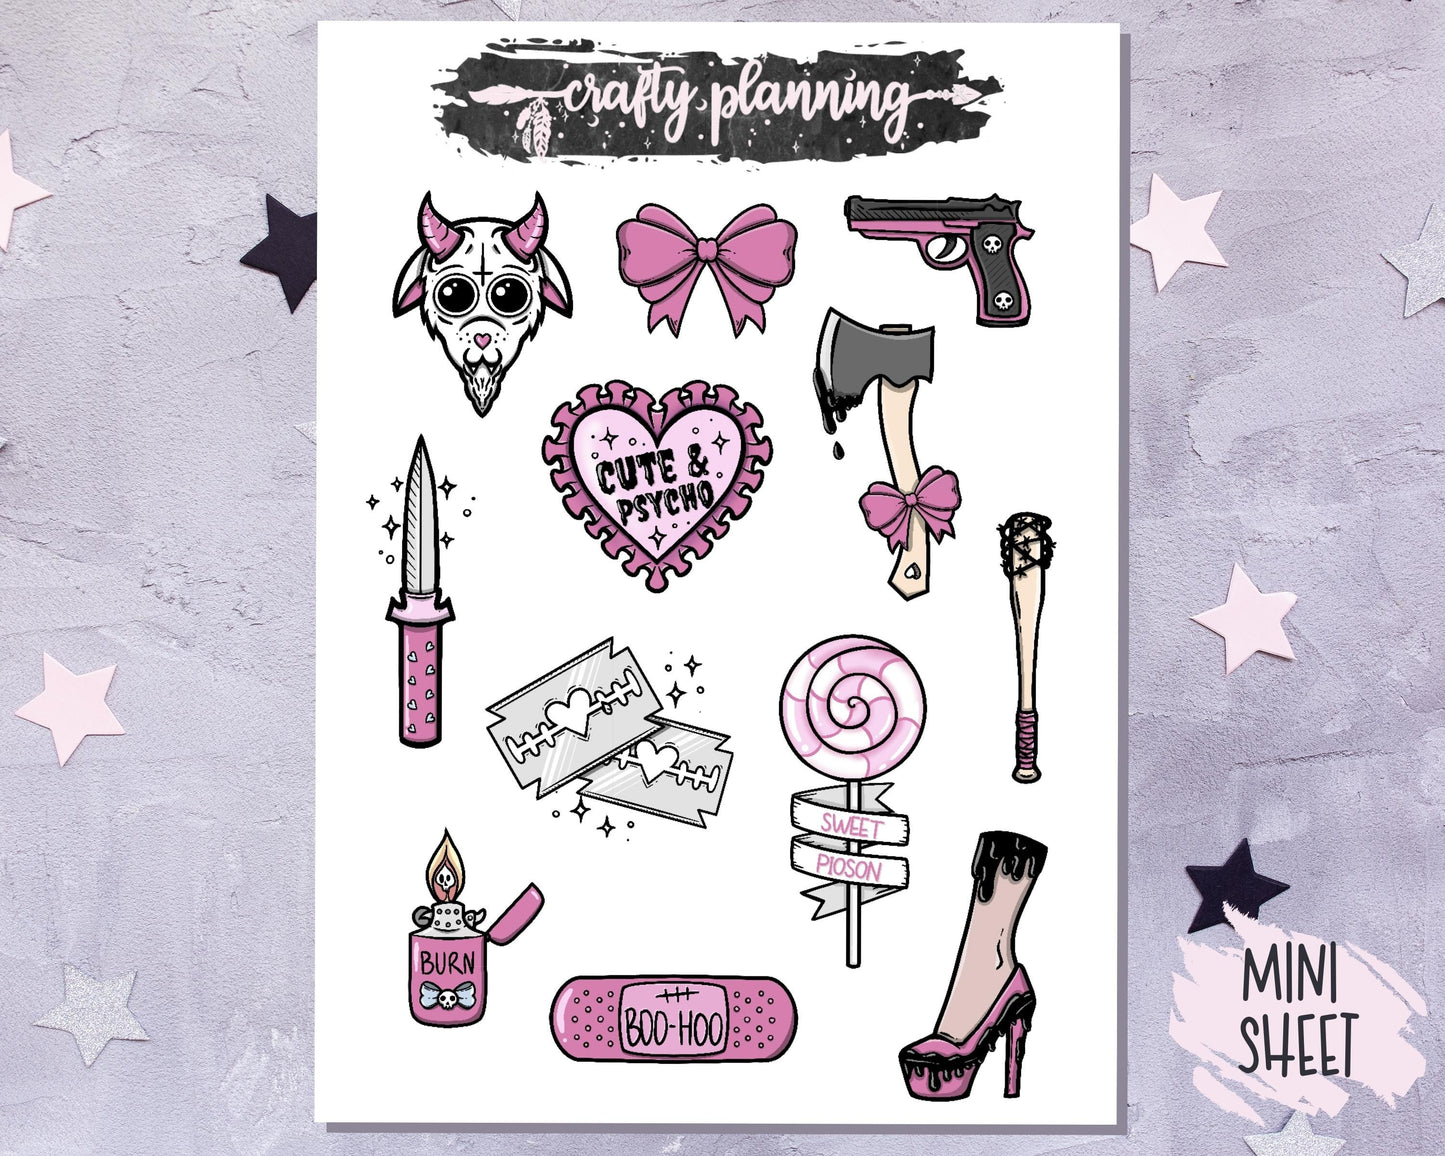 Goth Stickers, Gothic Stickers, Cute and Psycho, Spooky Stickers, Creepy Stickers, Journal Stickers, Scrapbook Stickers